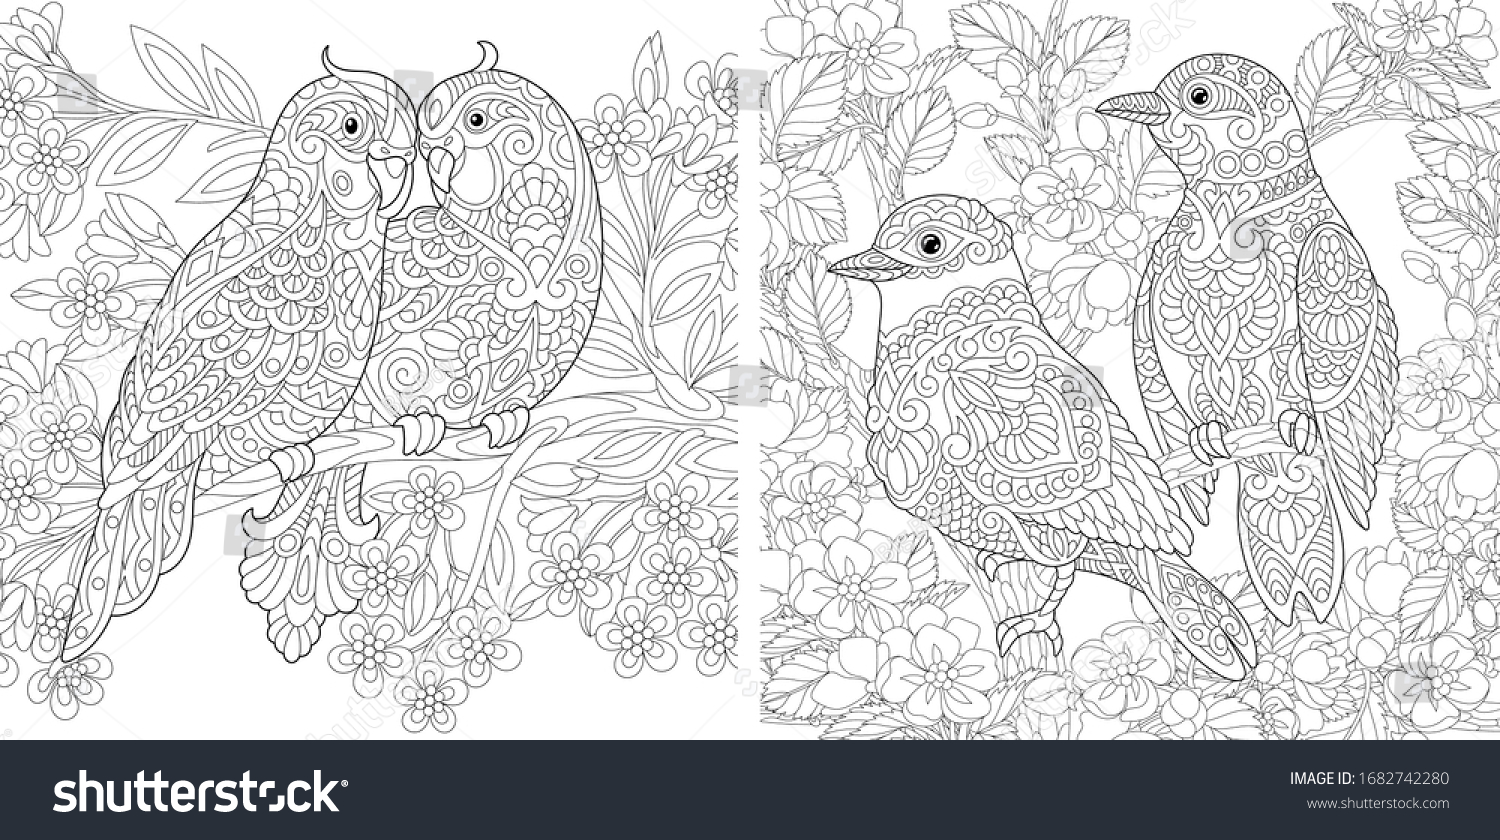 Adult Coloring Pages Cute Birds Sitting Stock Vector Royalty Free ...